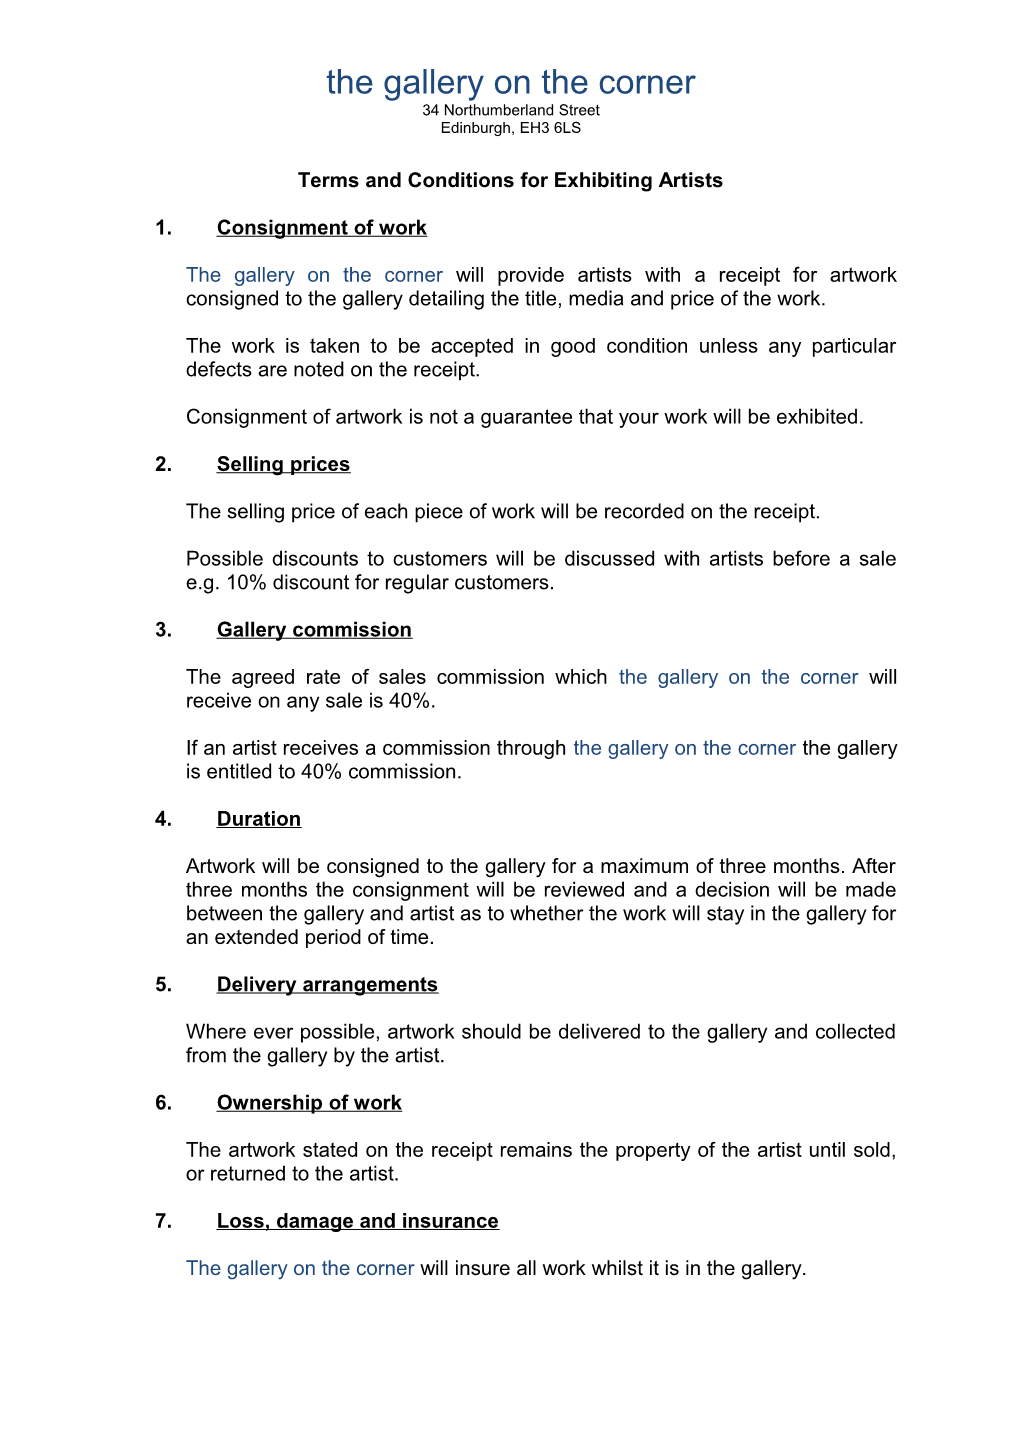 Terms and Conditions for Exhibiting Artists